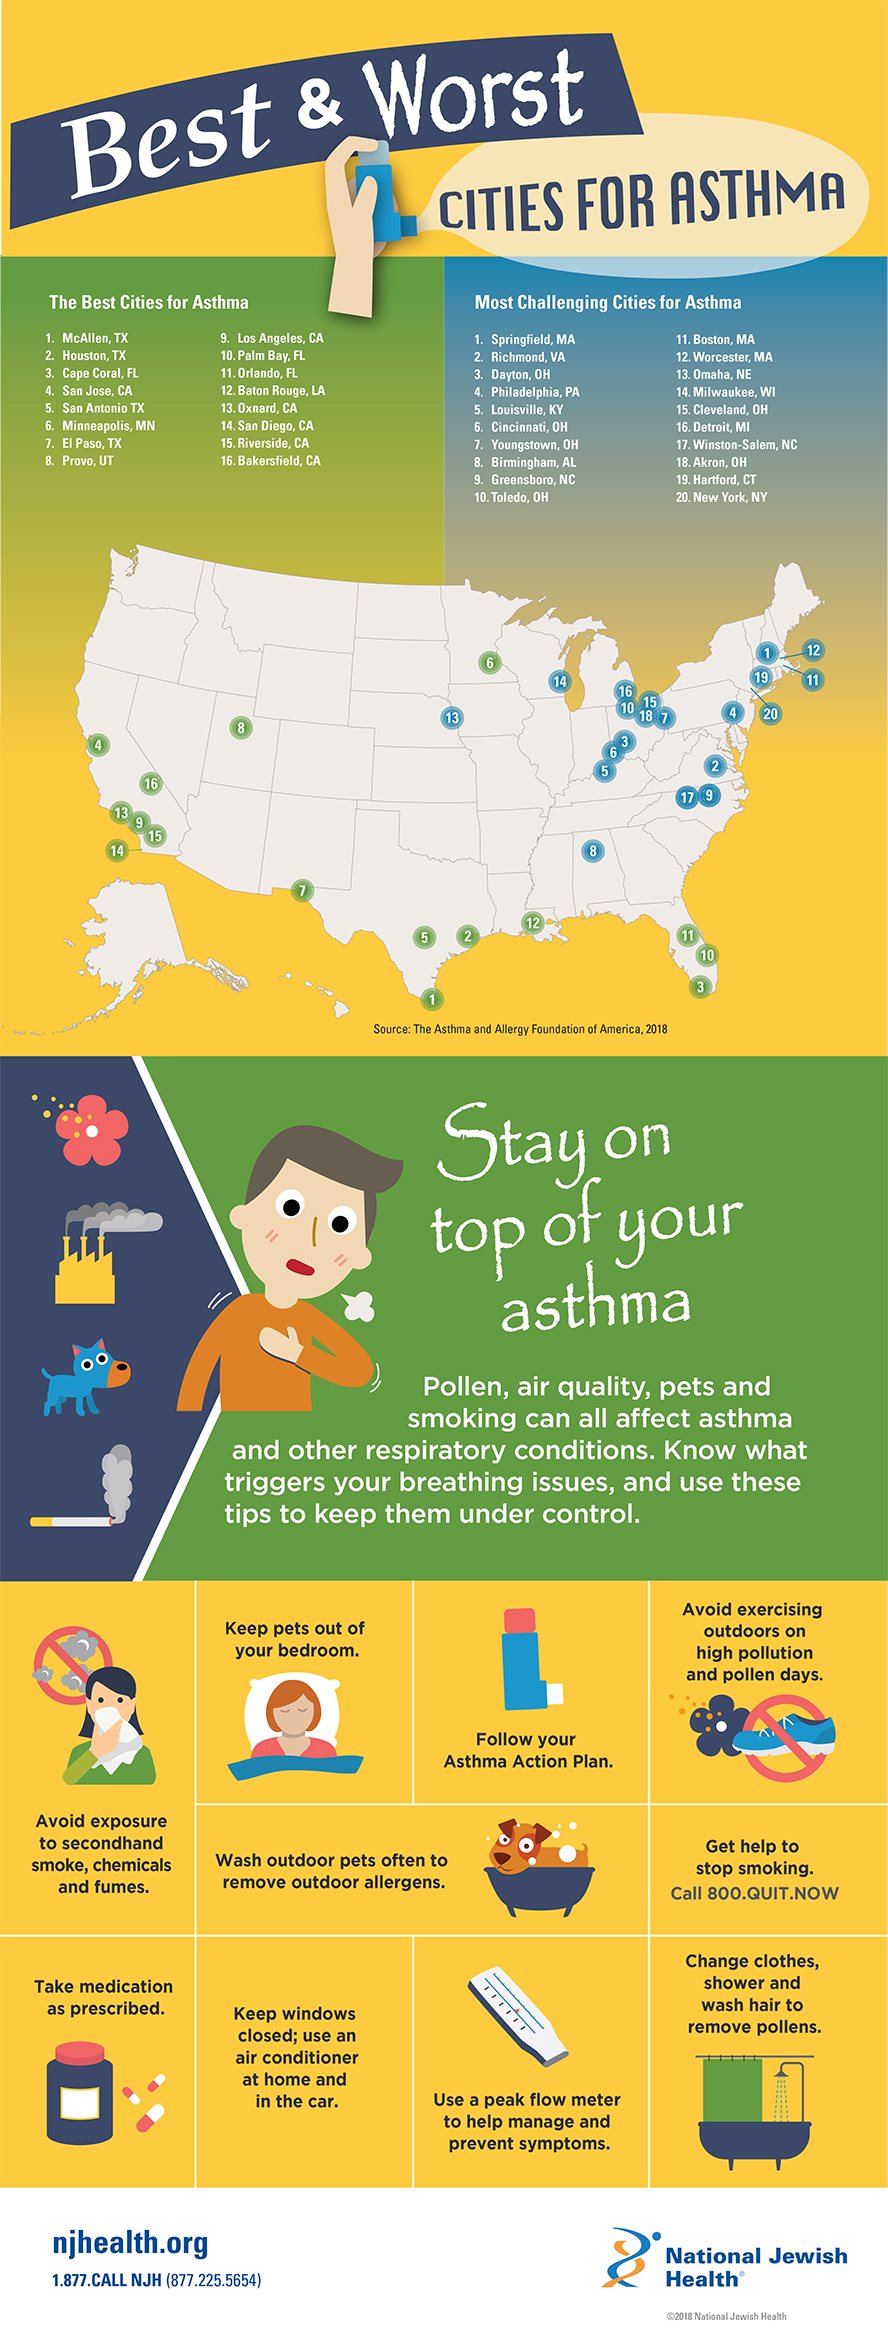 best and worst cities for asthma - infographic